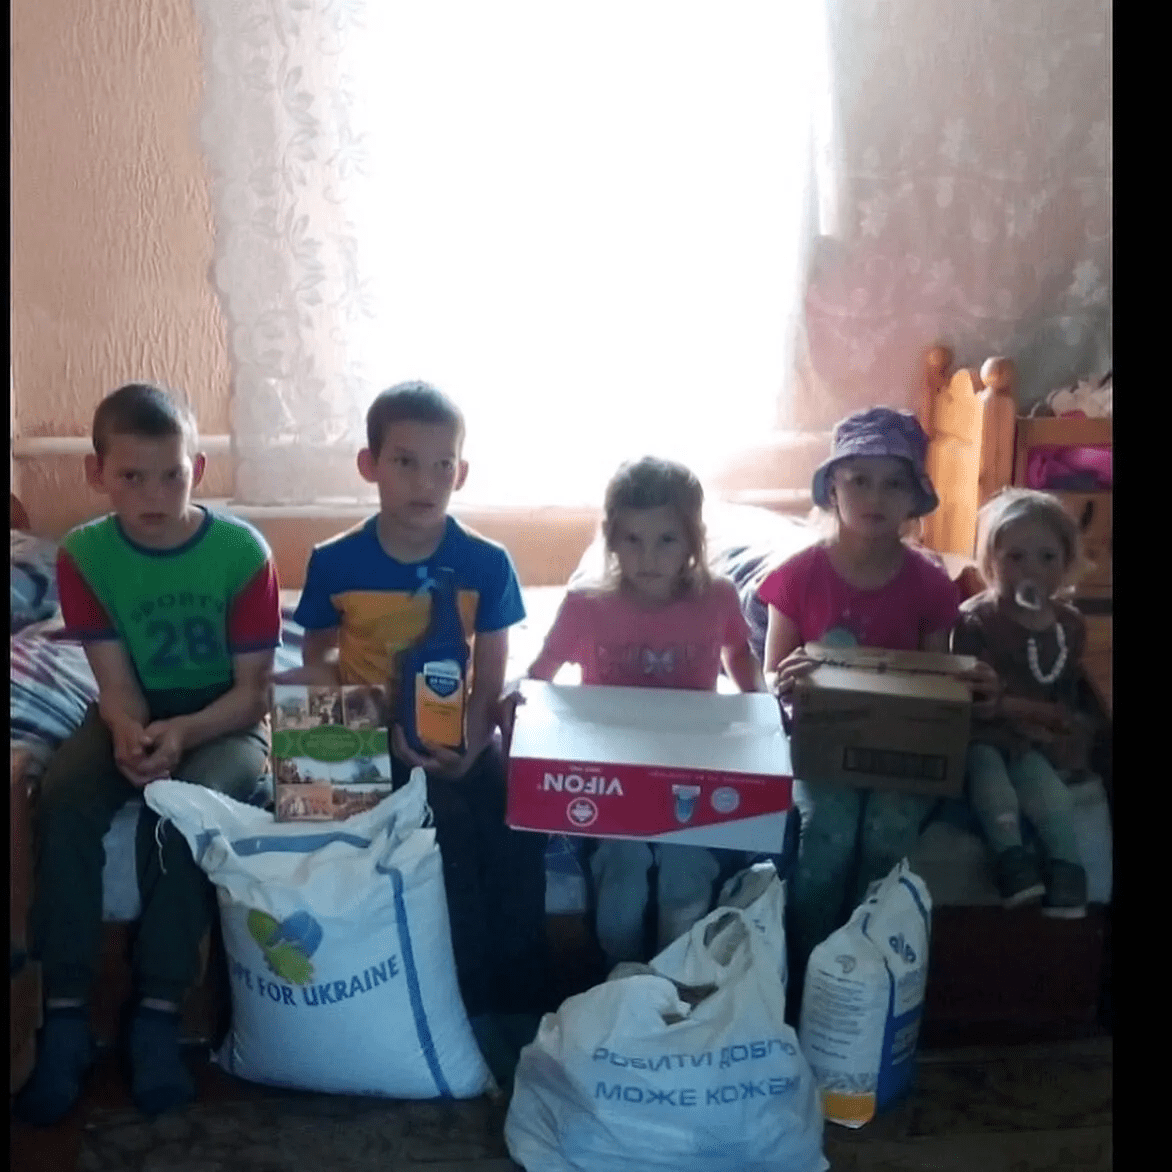 a group of children sitting on a couch holding boxes.